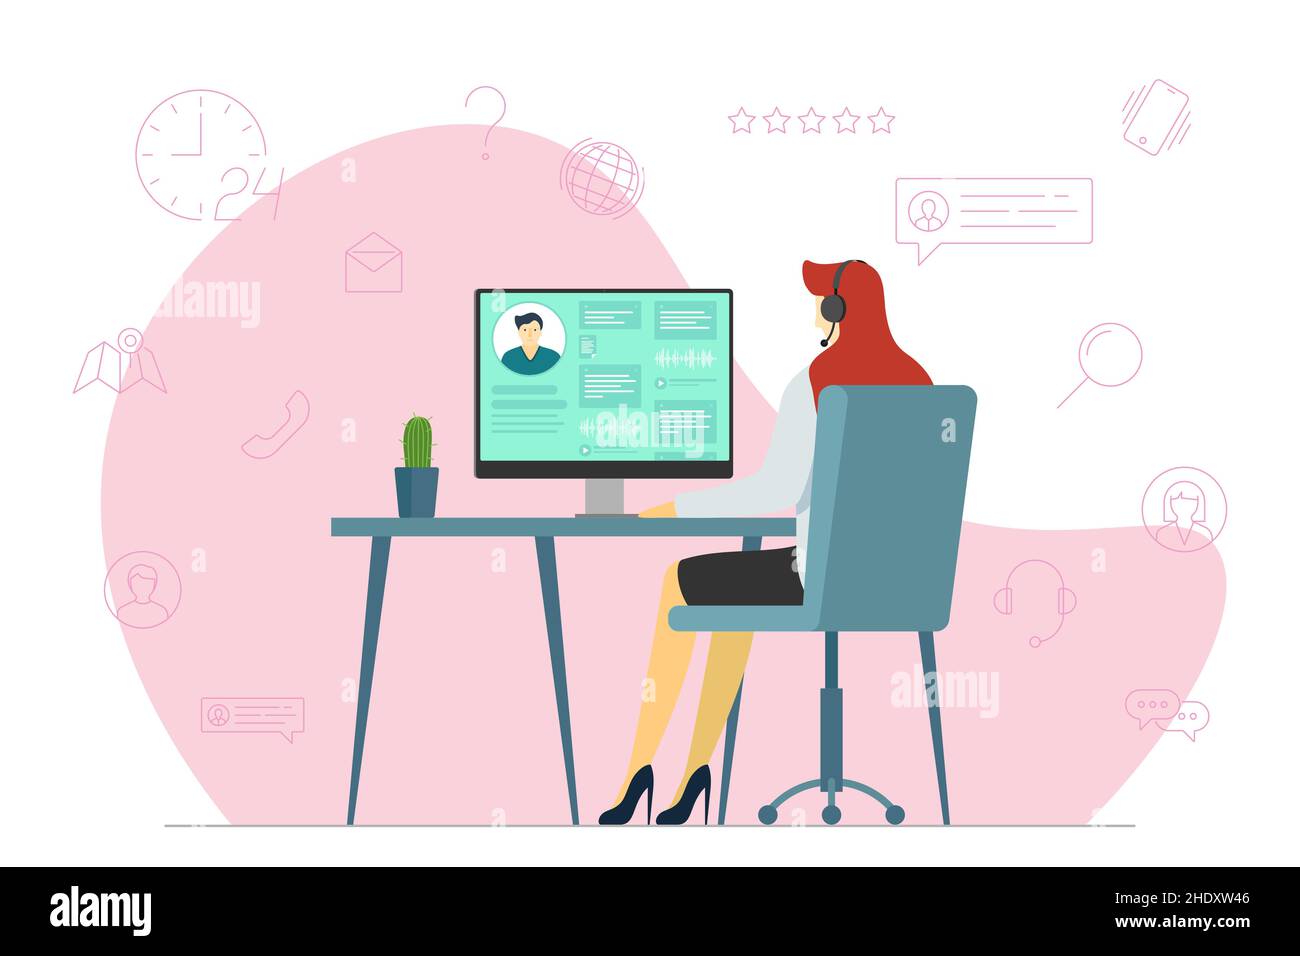 Call center operator woman and hot line service icons. Female helpline worker with headset at work. Online customer support department staff, telemarketing, consultation and assistance centre hotline Stock Vector